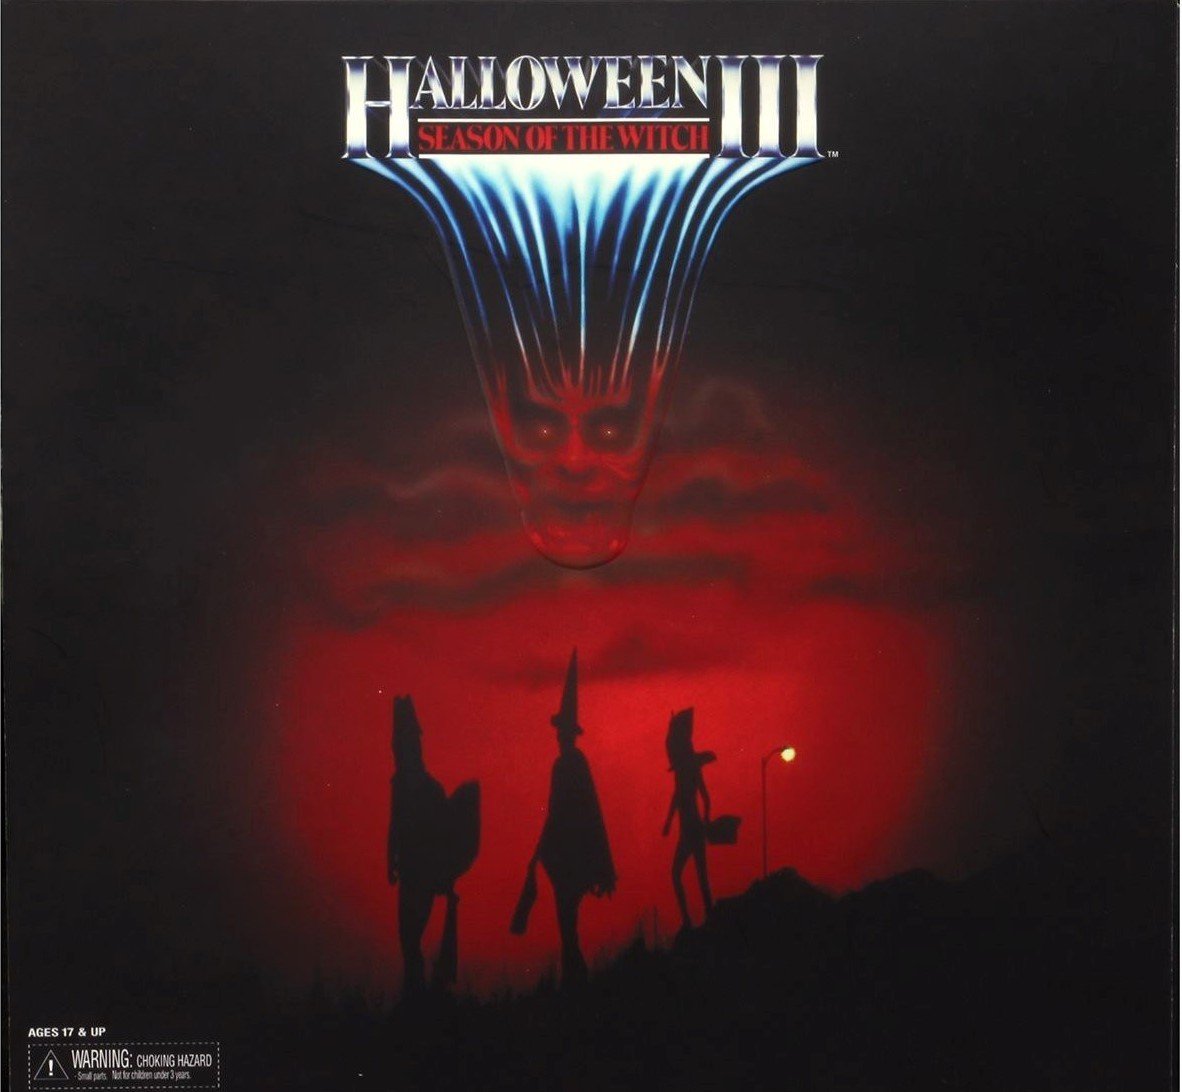 Halloween III of the Witch 3 Pack